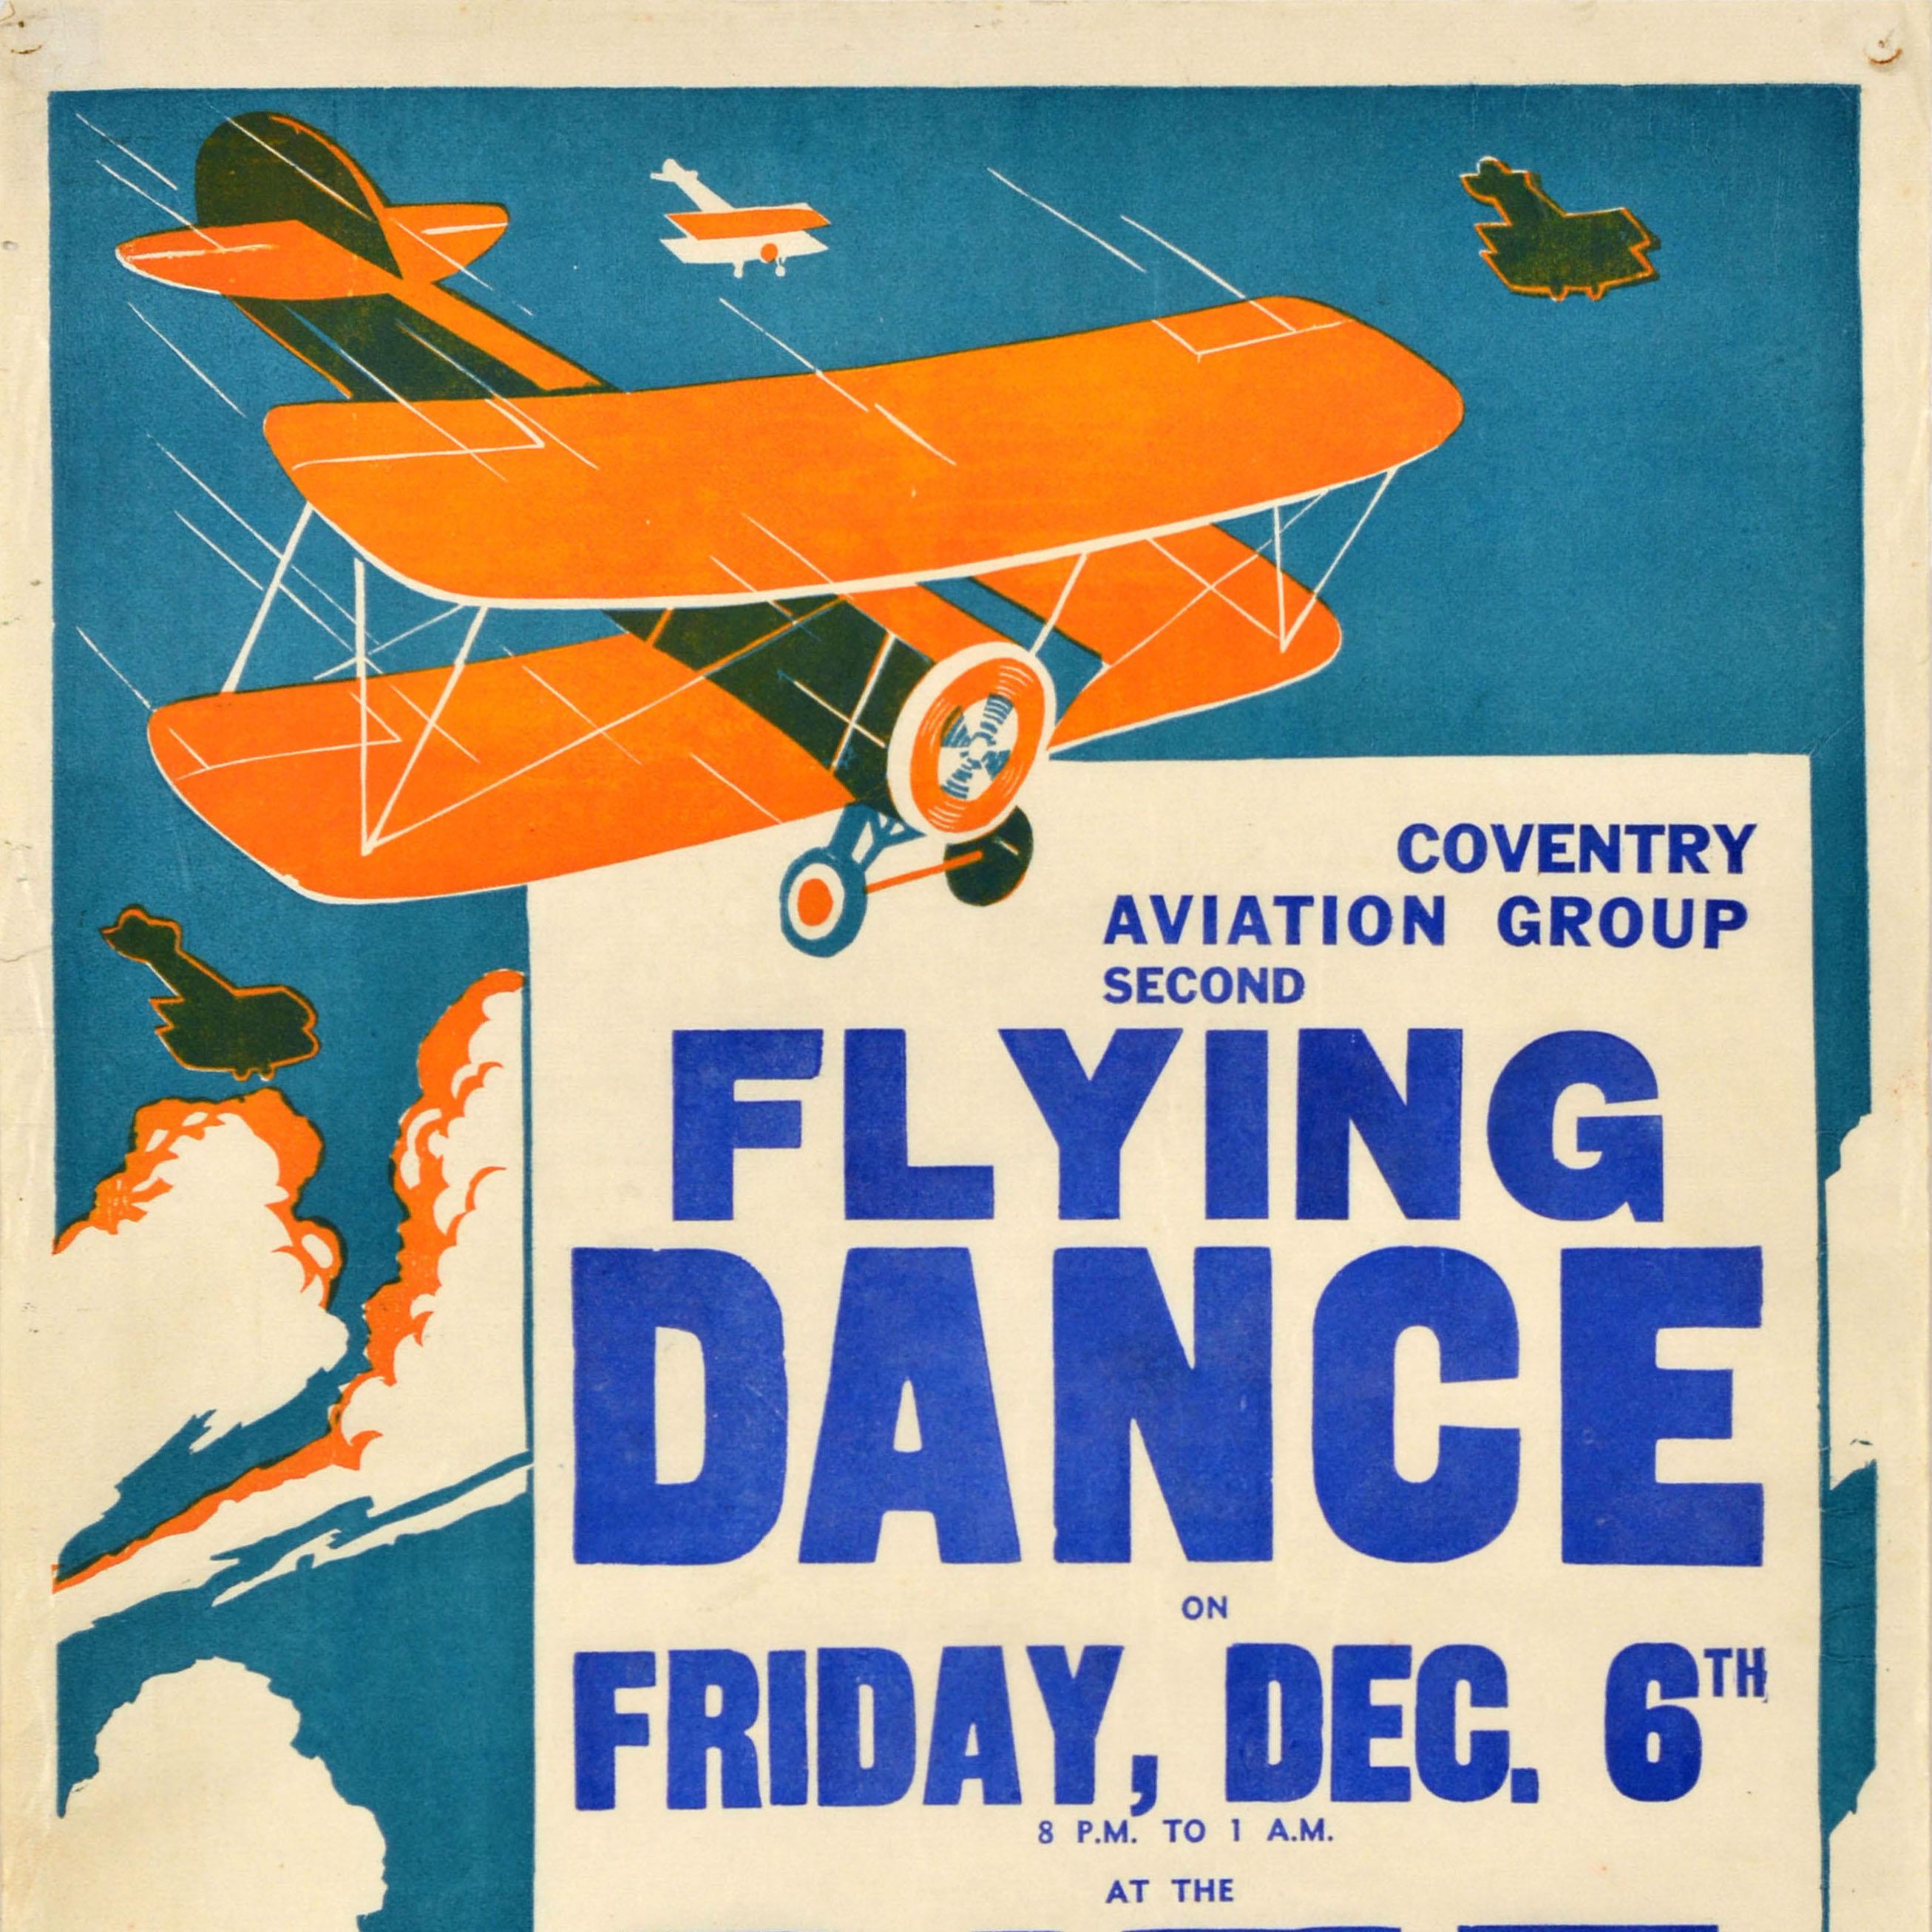 Original vintage advertising poster for Coventry Aviation Group Second Flying Dance on Friday, Dec. 6th at the Ritz Cinema Albany Road, featuring an illustration of planes in the sky, bold blue lettering over a light background. Good condition,